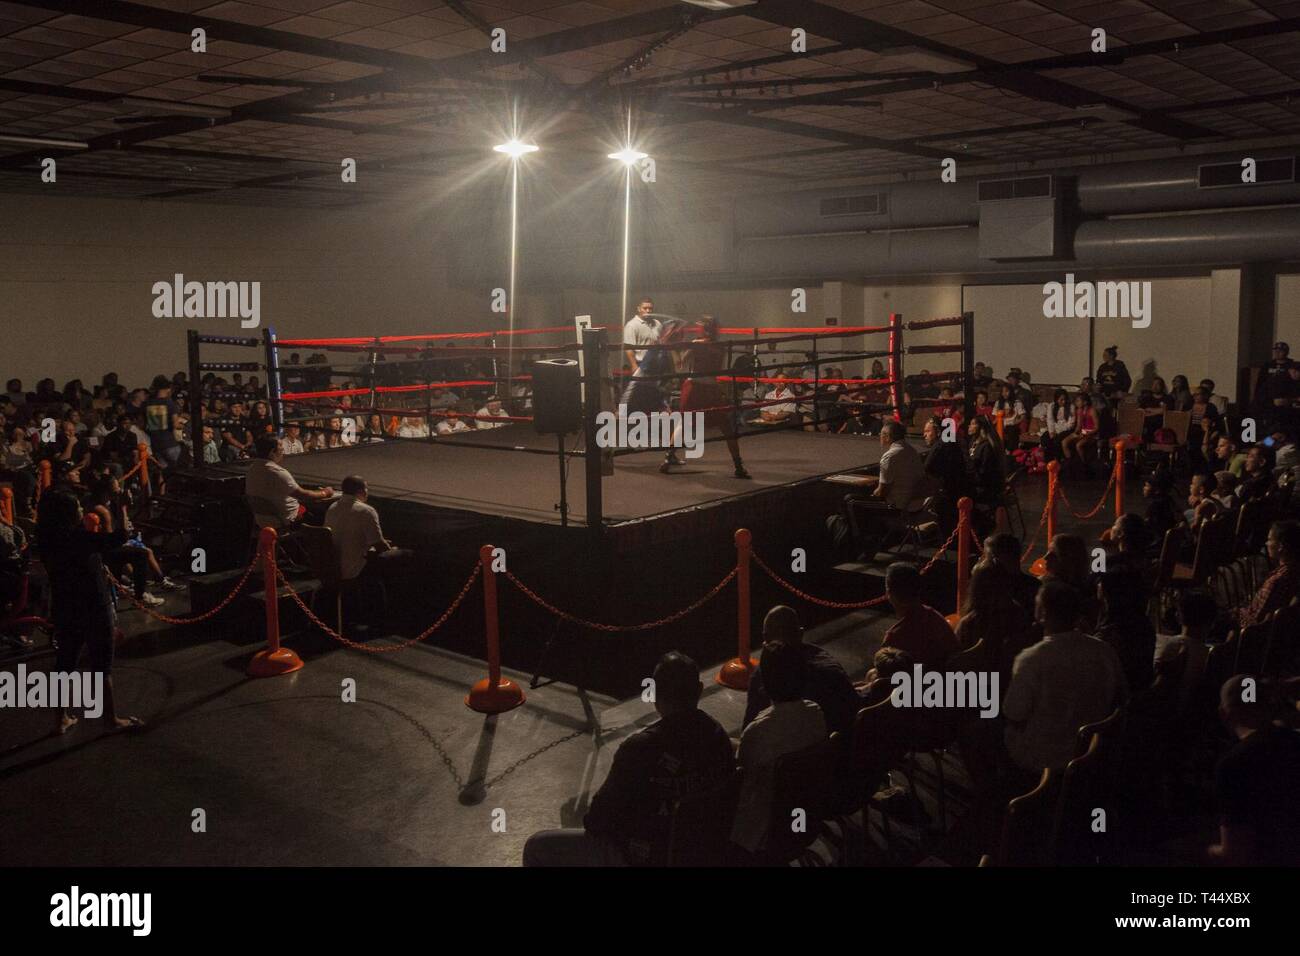 Spectators watch a boxing match during the Pearlside Boxing Club event, Marine Corps Base Hawaii, Feb